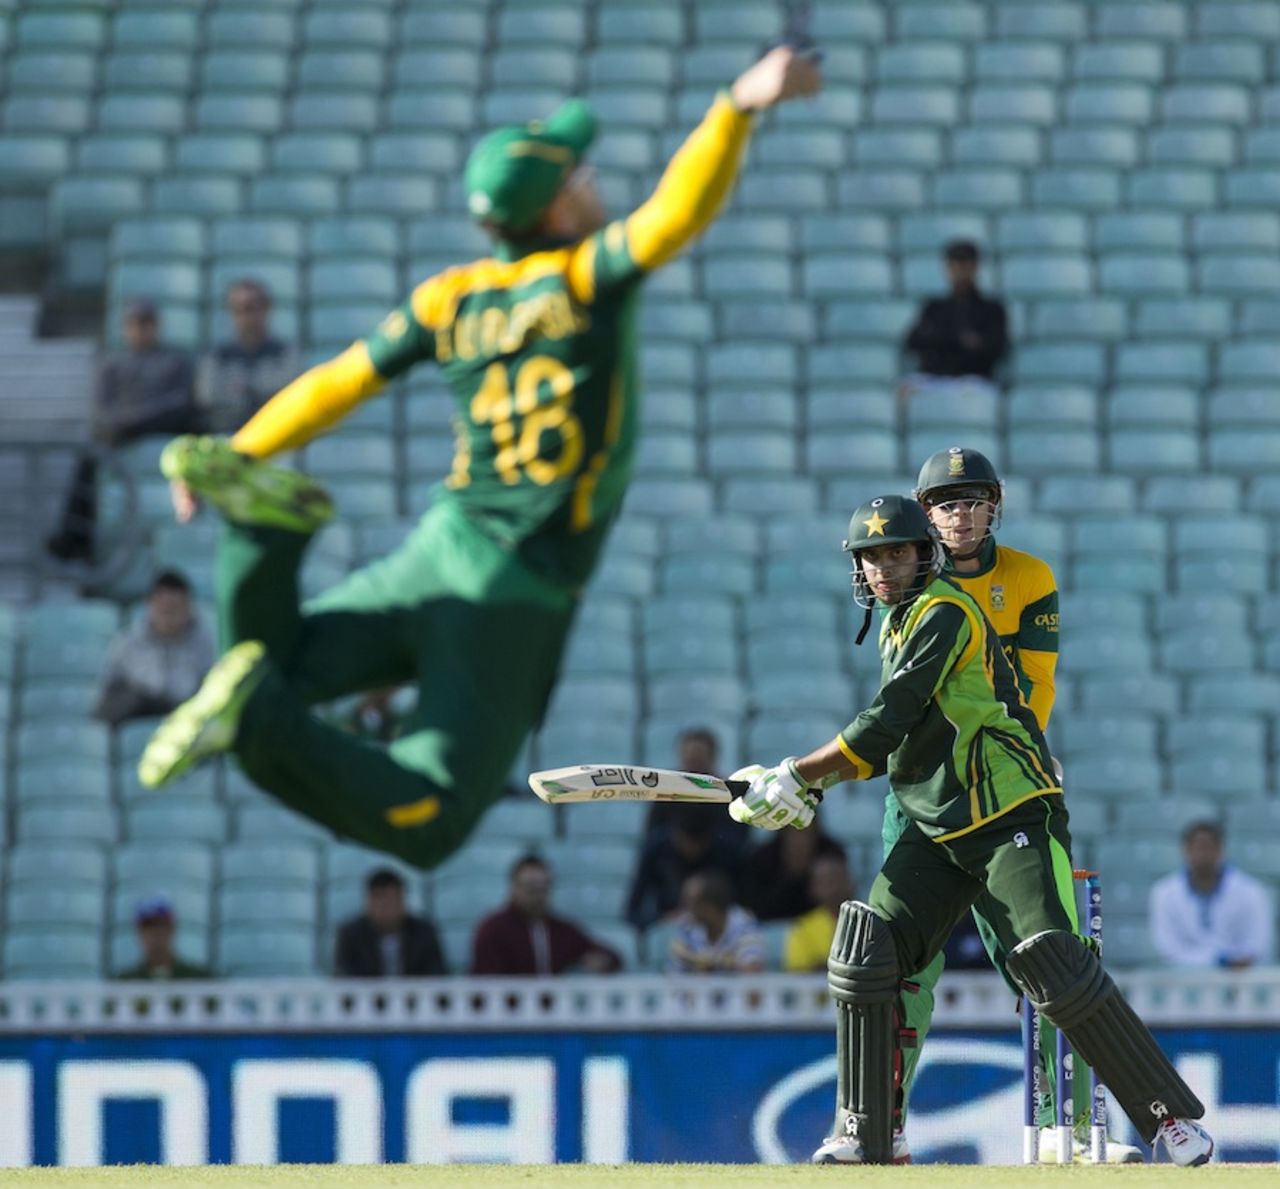 Faf du Plessis leaps to stop a shot from Umar Amin, Pakistan v South Africa, Champions Trophy warm-up, The Oval, June 3, 2013